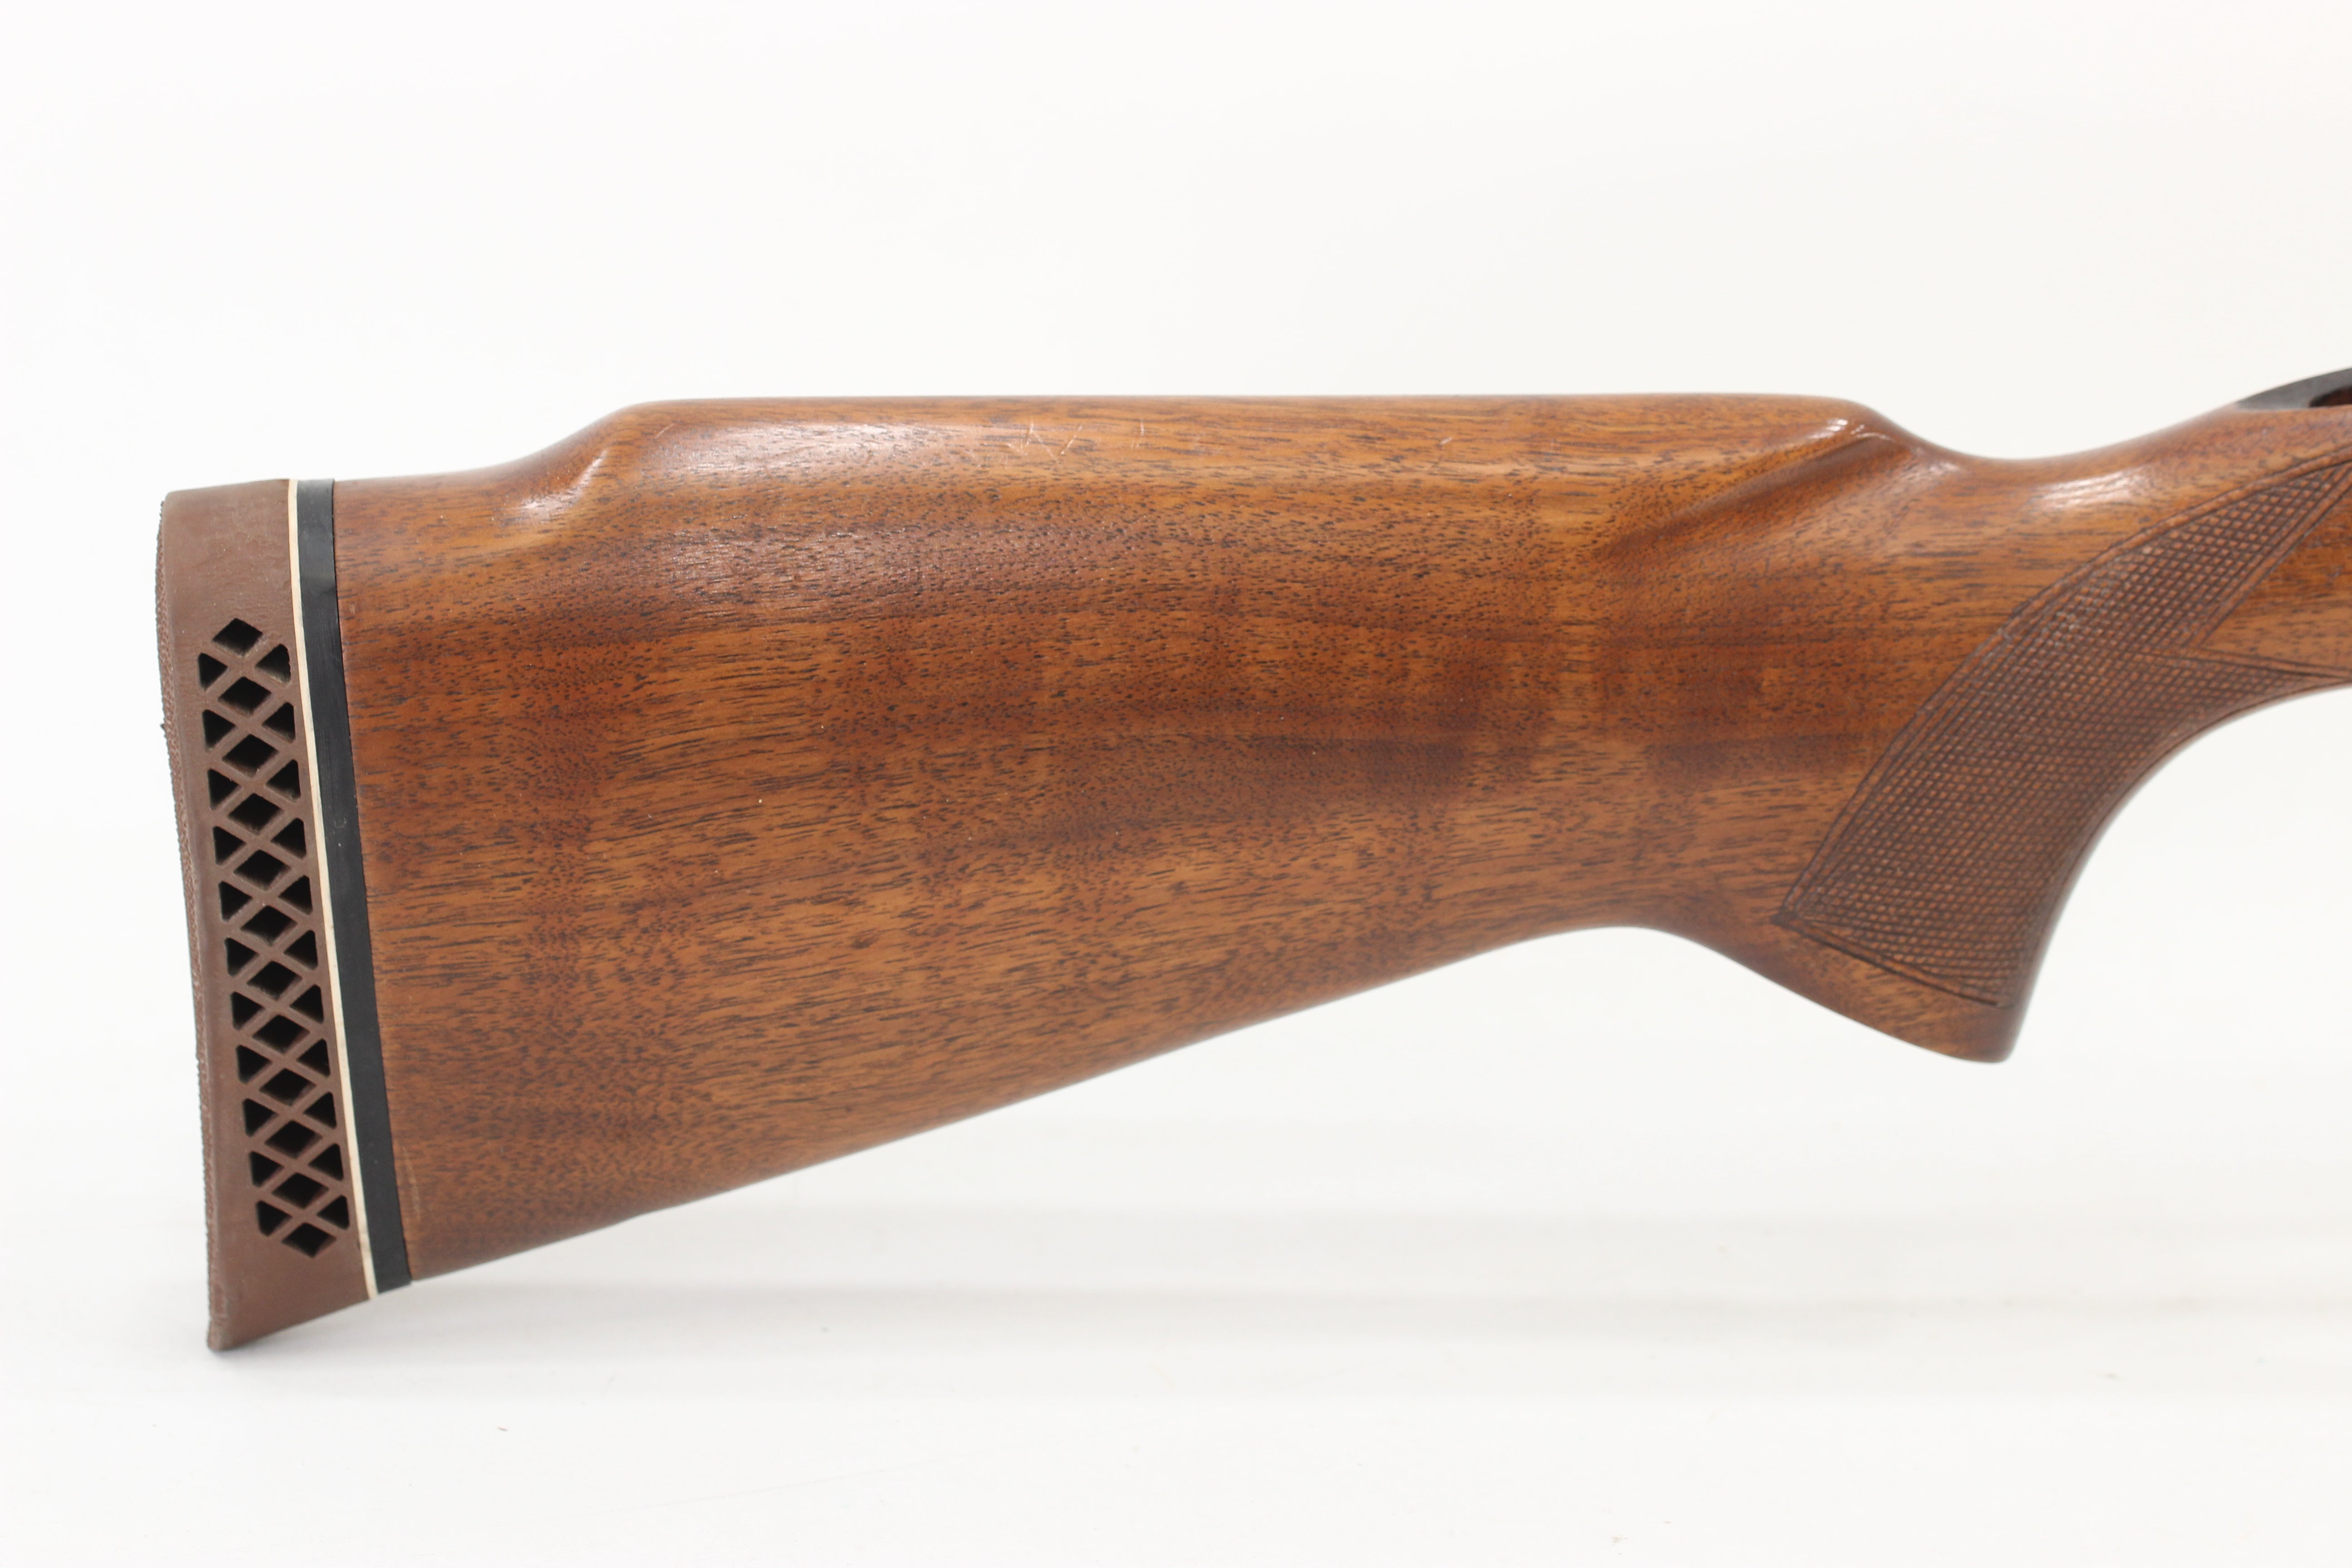 1952-1961 Monte Carlo Featherweight Stock - Modified to Fit Standard Rifle